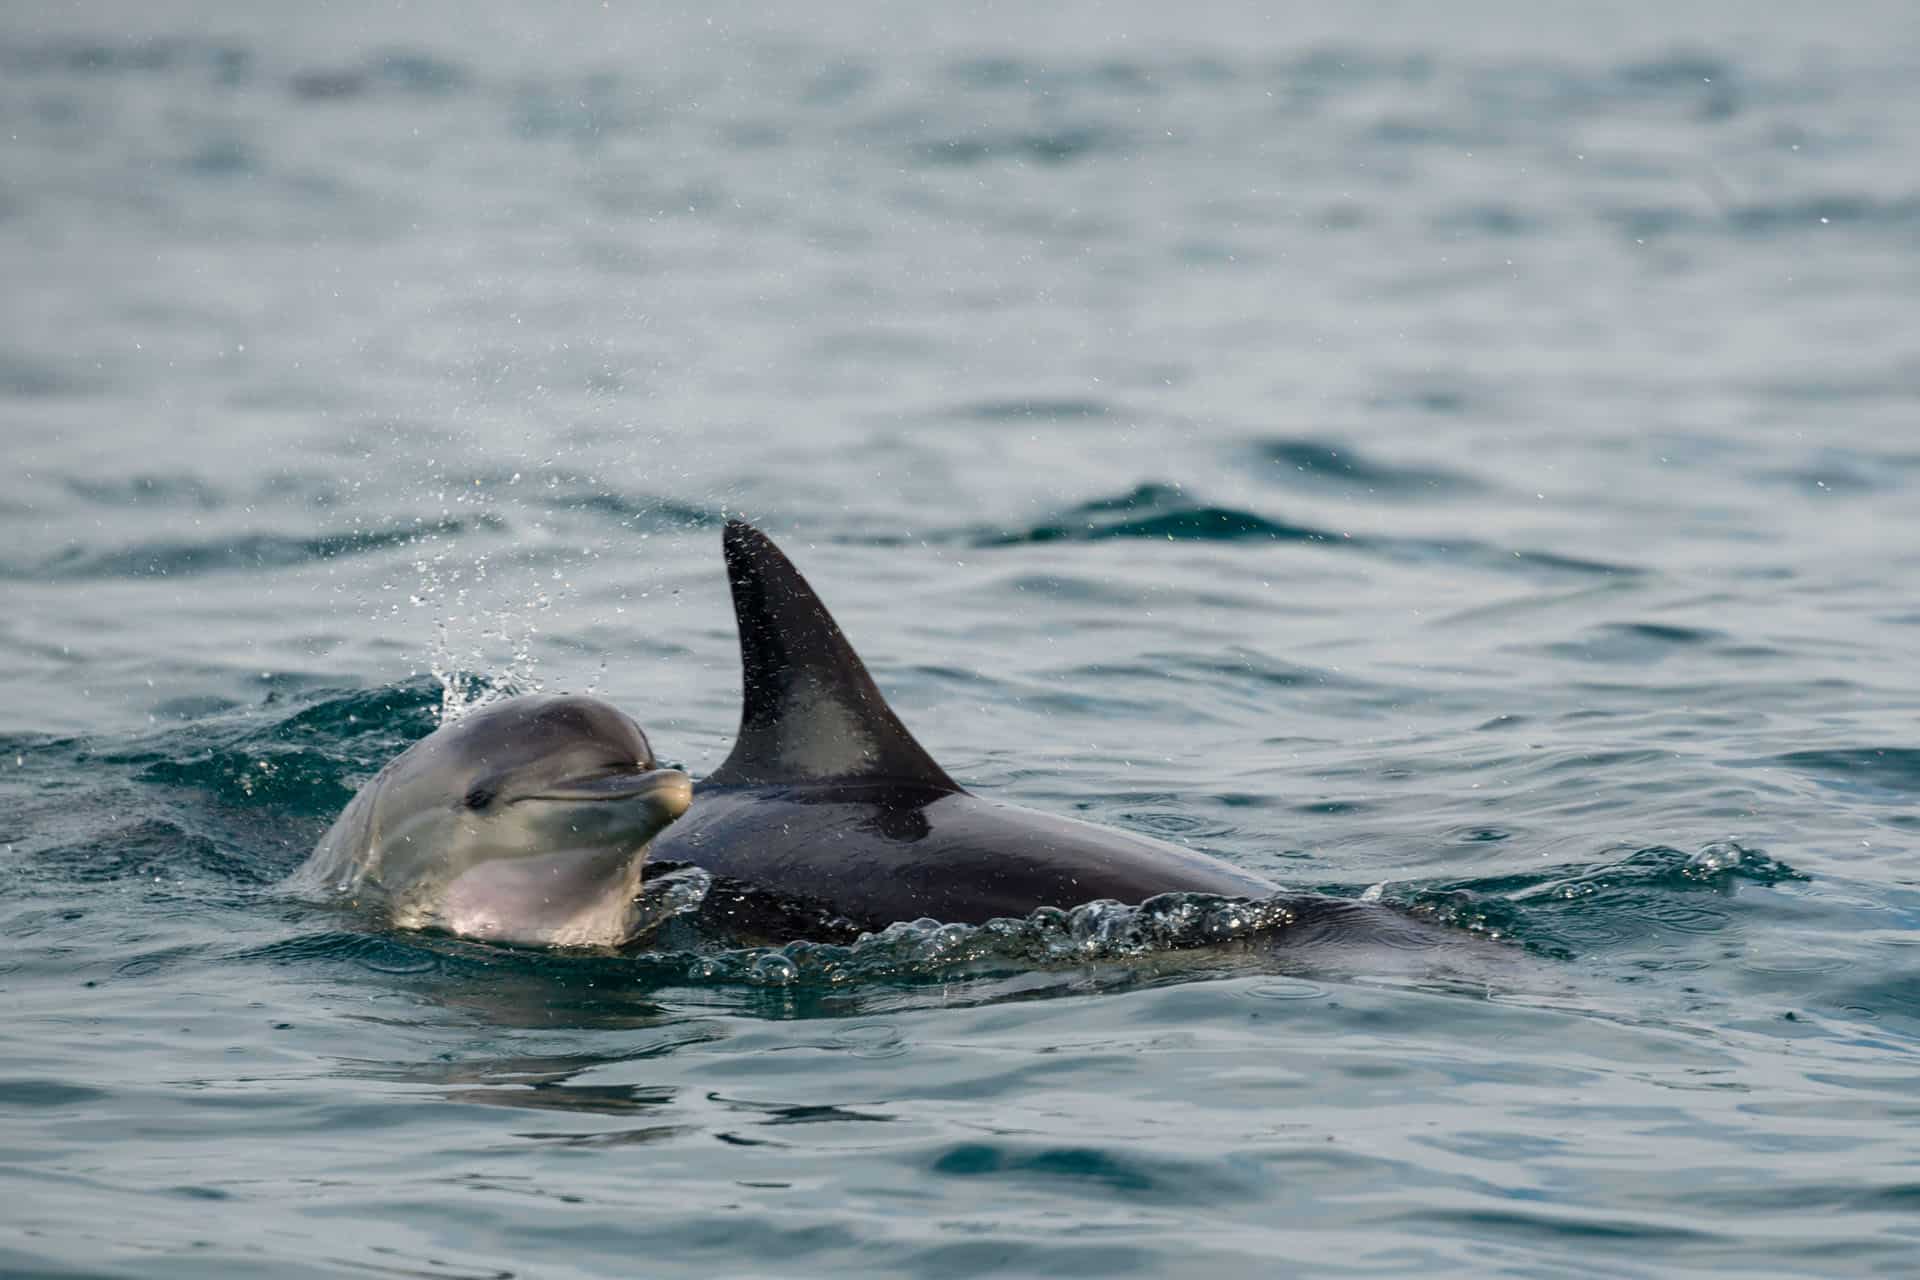 Bottlenose dolphin mother and calf - animals that make up the Marine Big Five in South Africa.